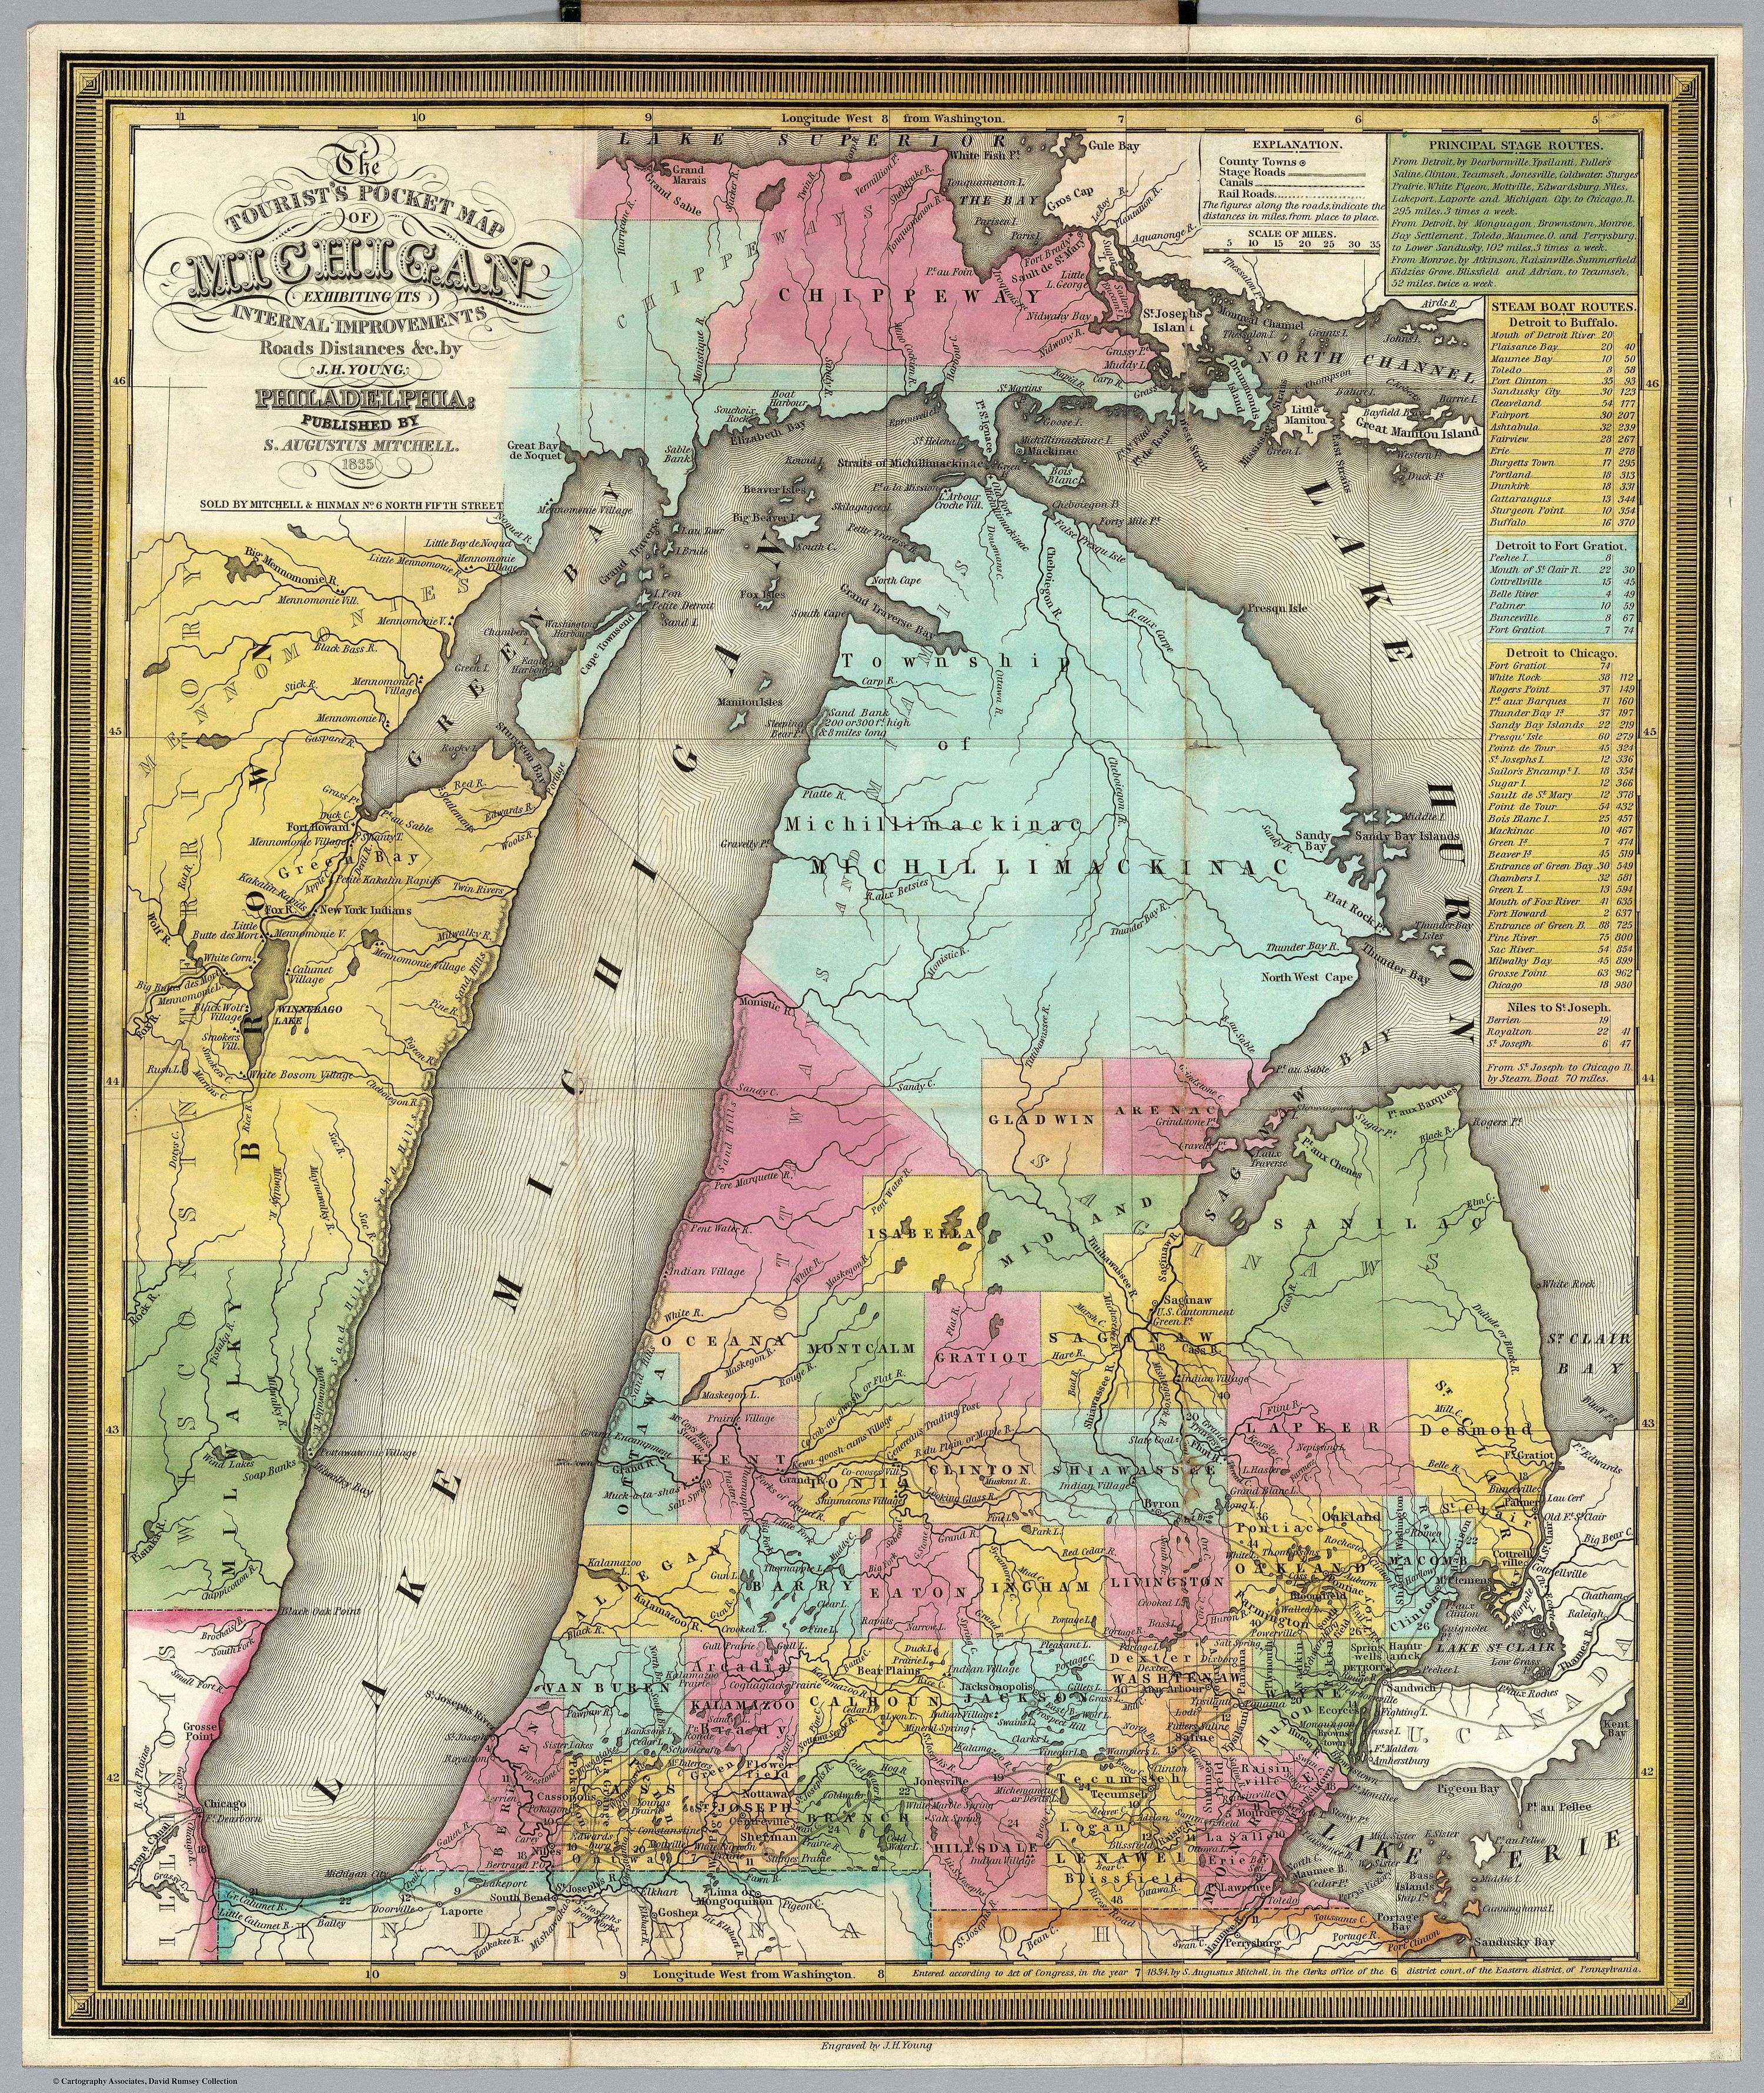 This inset from the 1835 Tourist's Pocket Map Of Michigan shows steam boat routes from Detroit to Buffalo, Detroit to Fort Gratiot, Detroit to Chicago via Michilimackinac, and Niles to St Joseph.